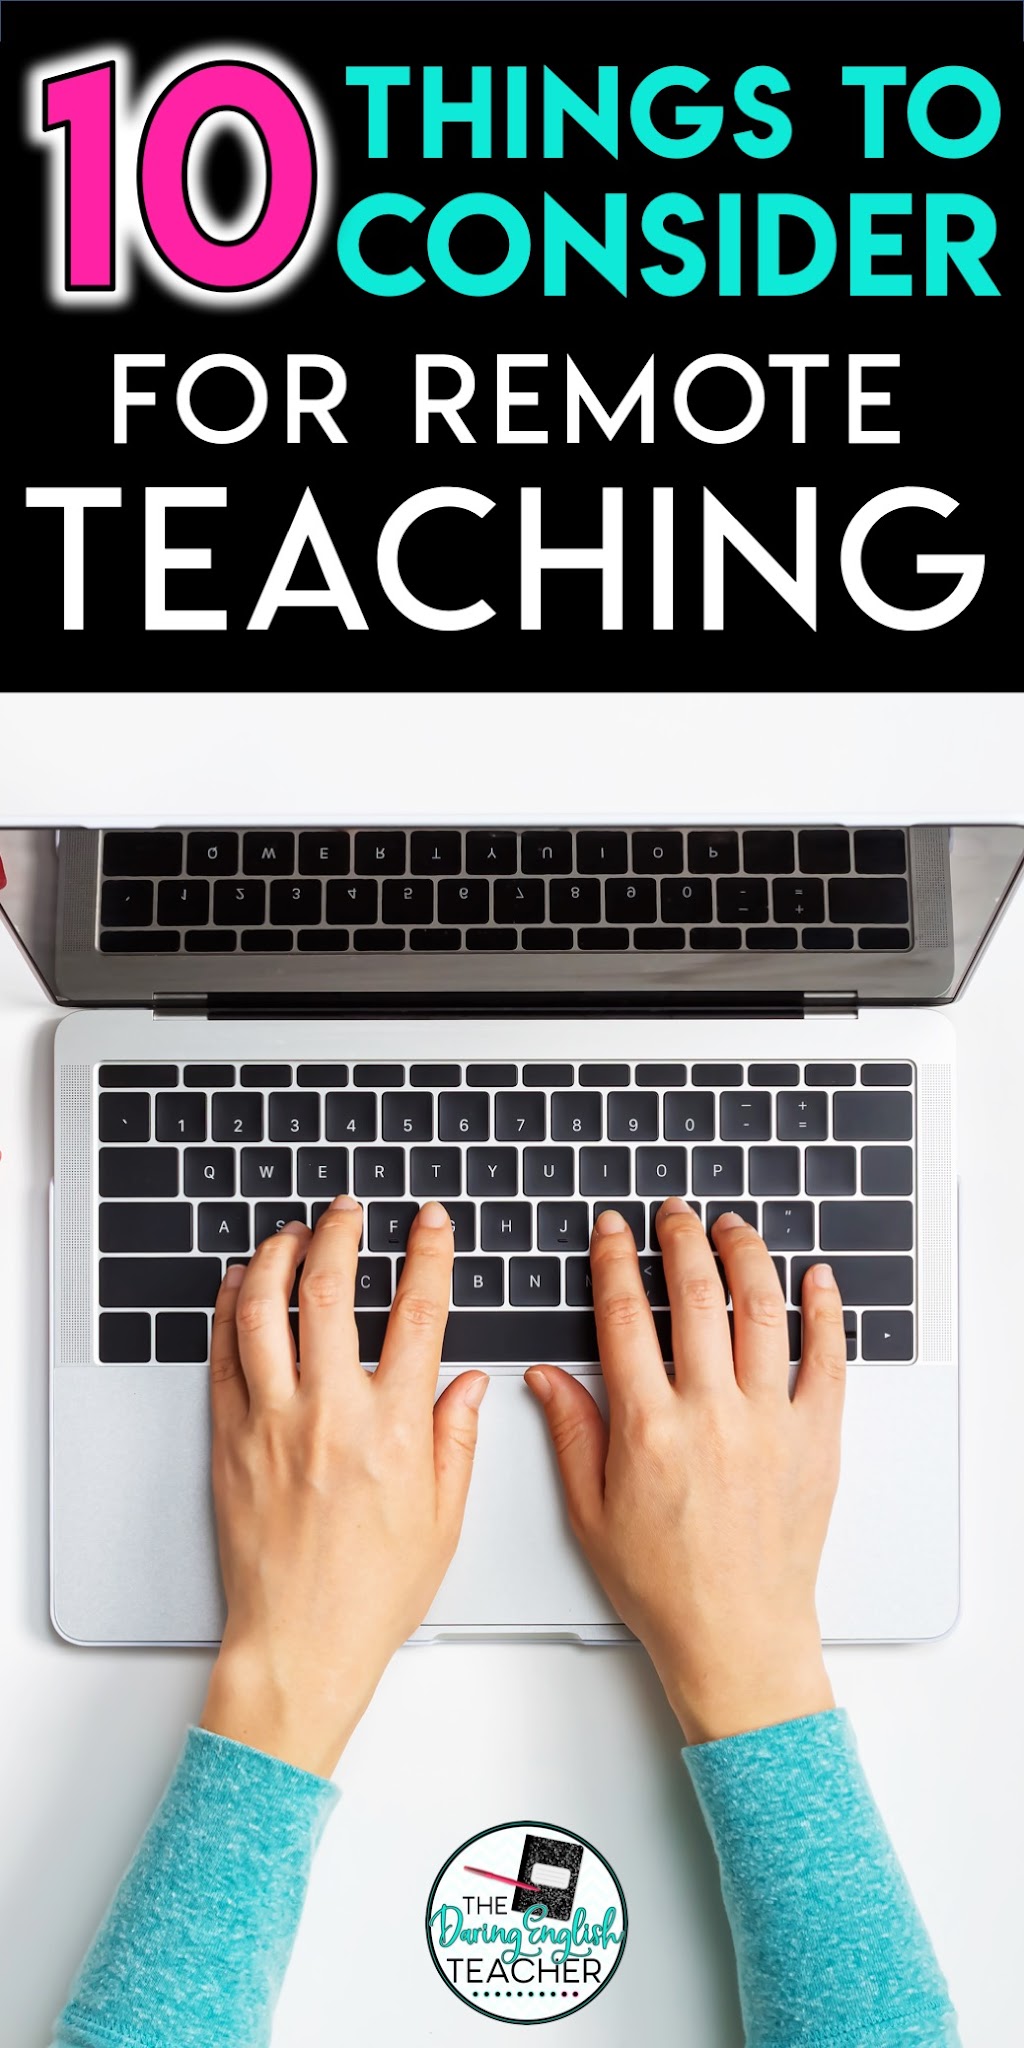 10 Things to Consider for Remote Teaching